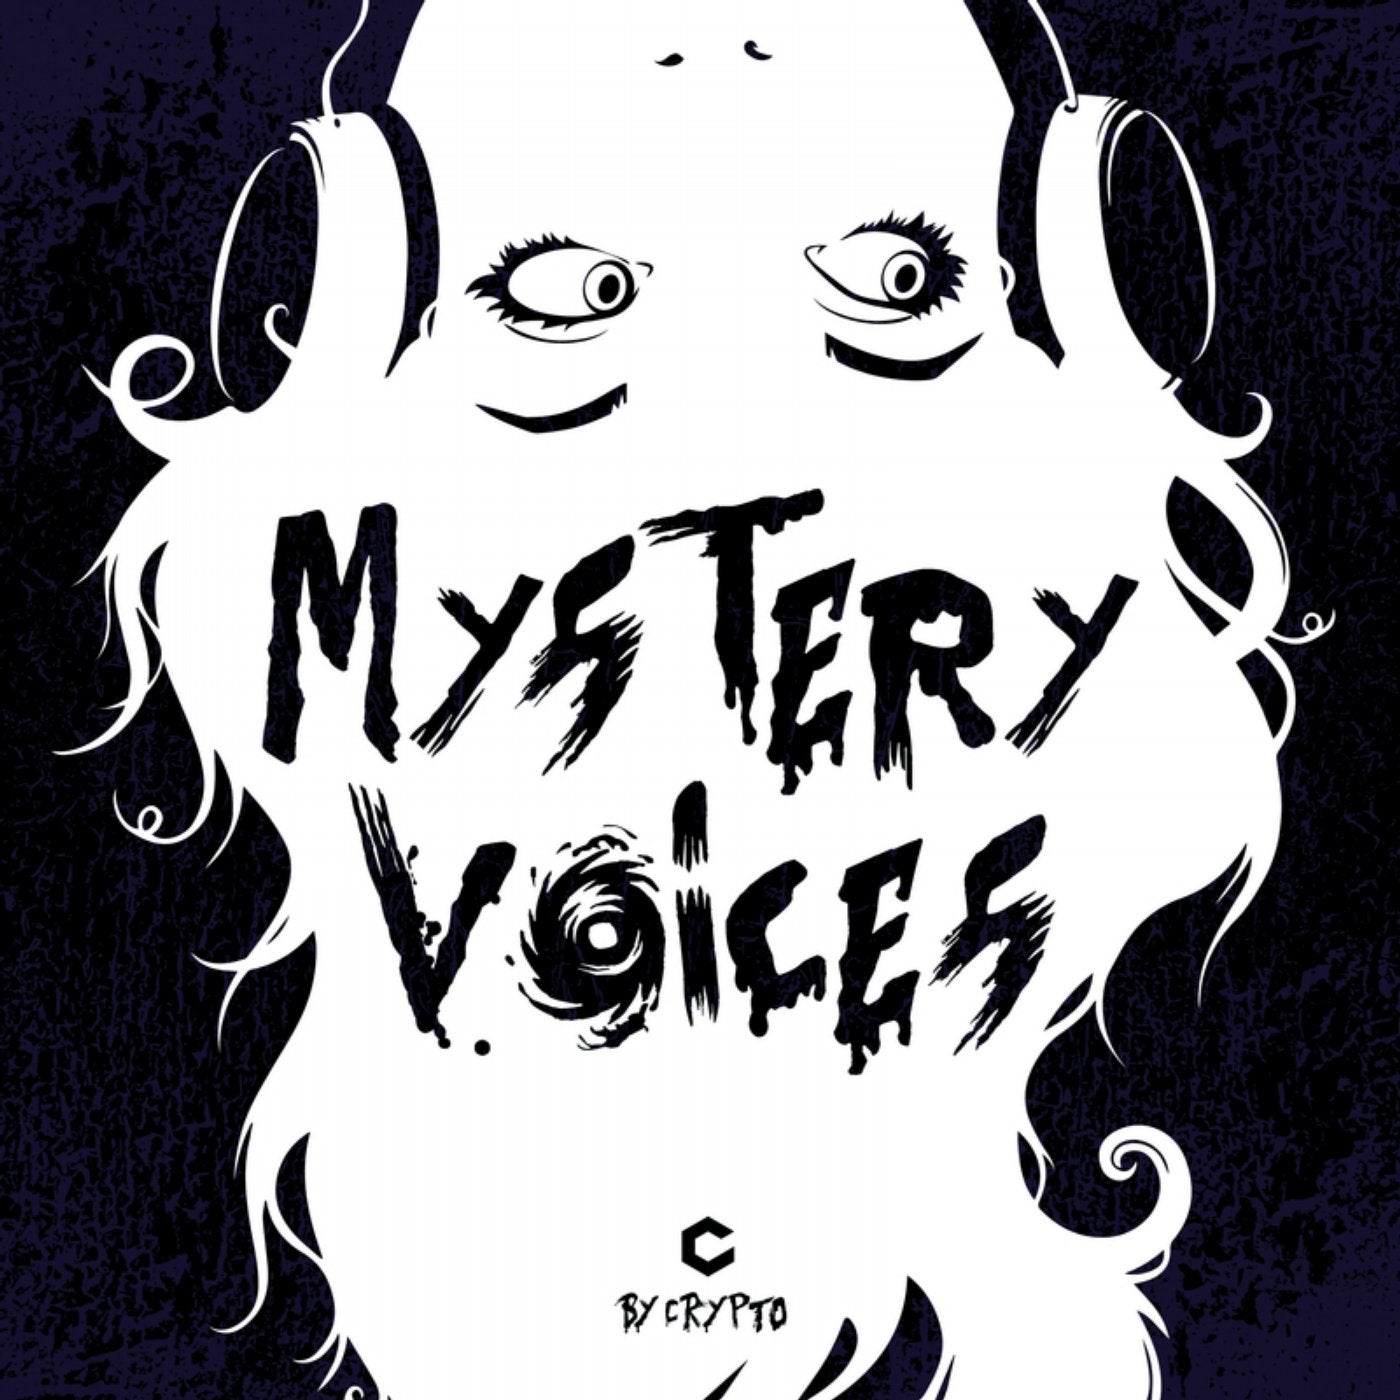 Mystery Voices